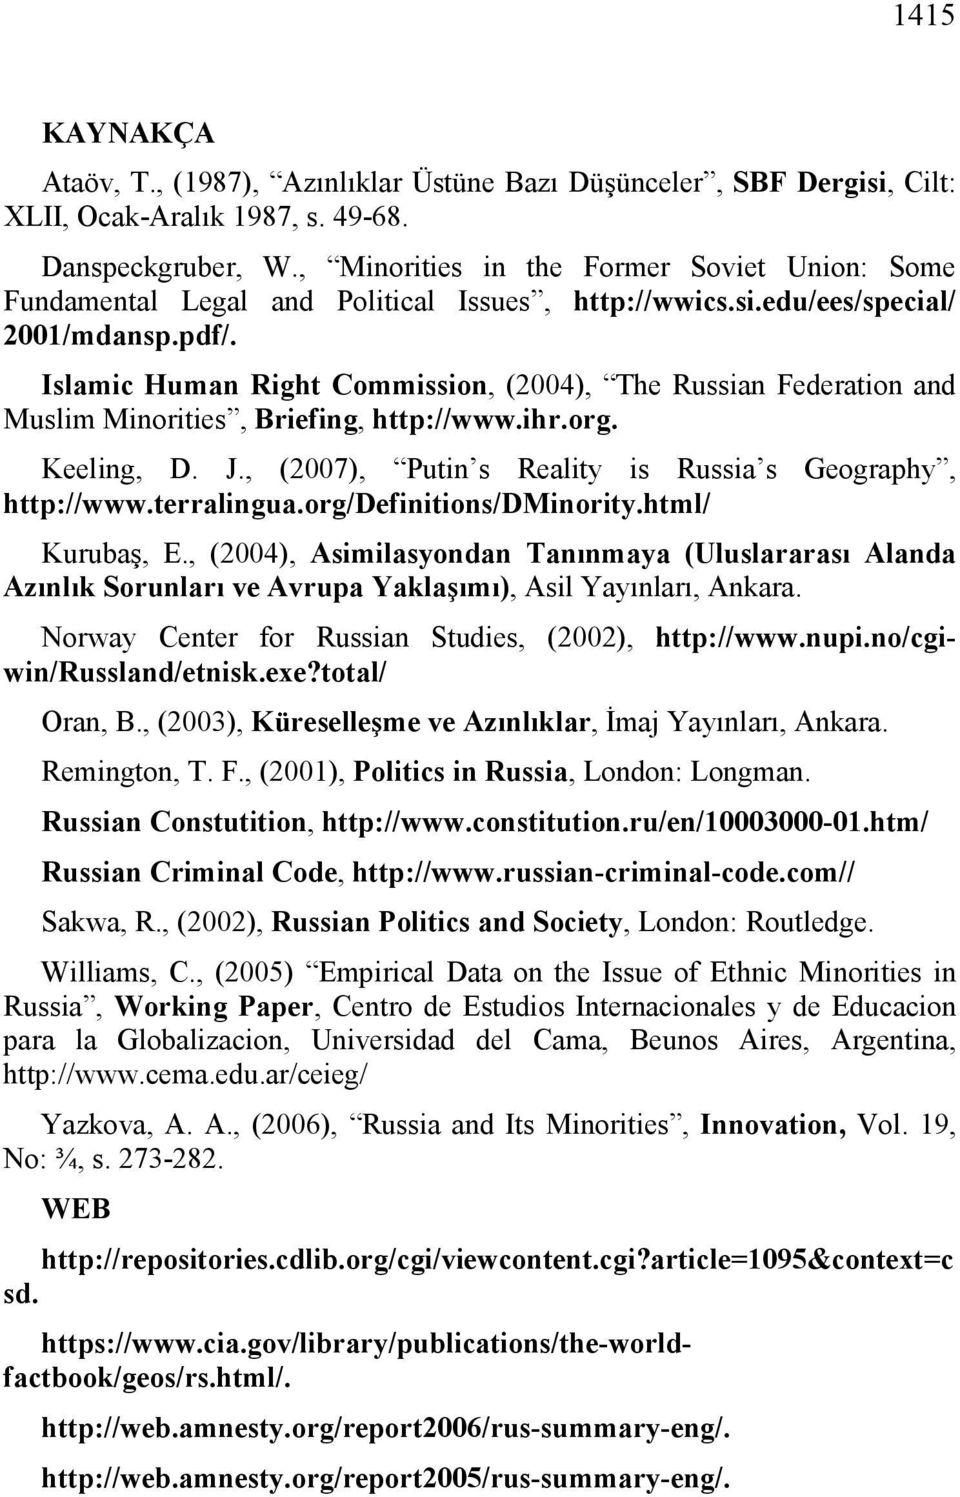 Islamic Human Right Commission, (2004), The Russian Federation and Muslim Minorities, Briefing, http://www.ihr.org. Keeling, D. J., (2007), Putin s Reality is Russia s Geography, http://www.